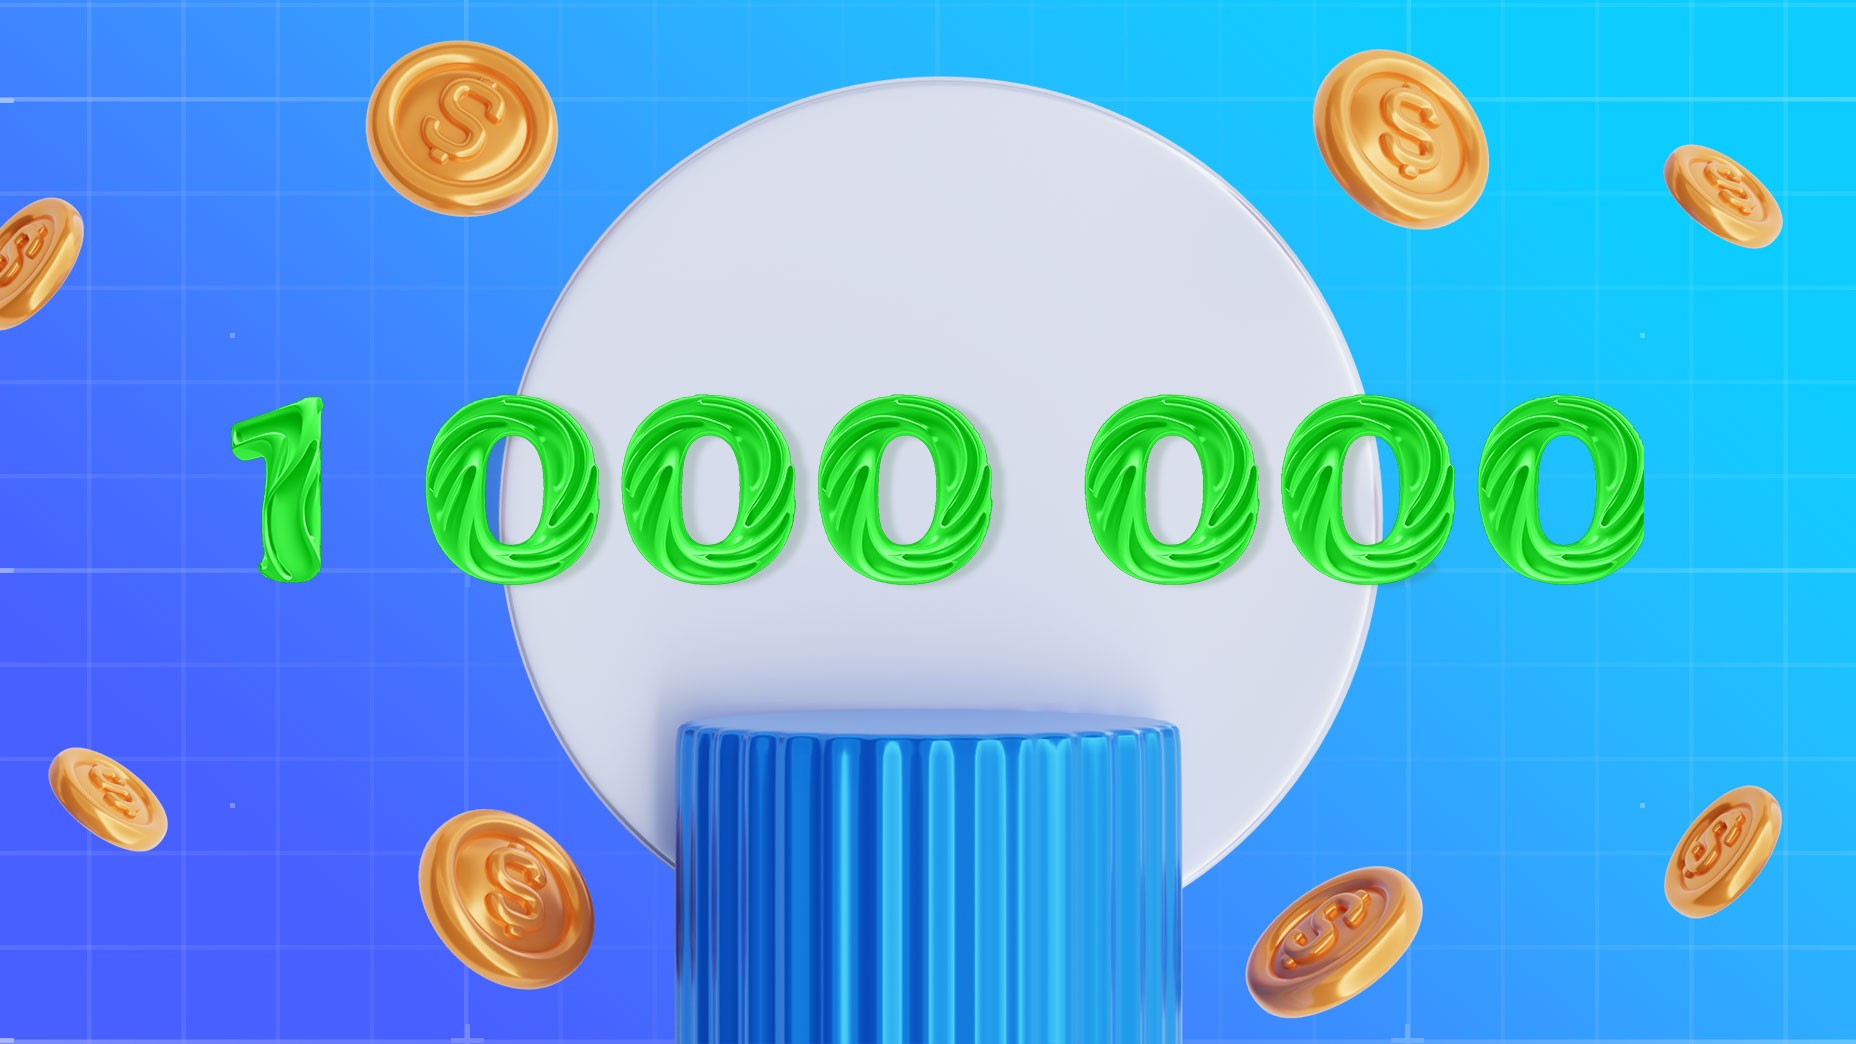 $1,000,000 Prize Fund Promotion! February Coupon Giveaway